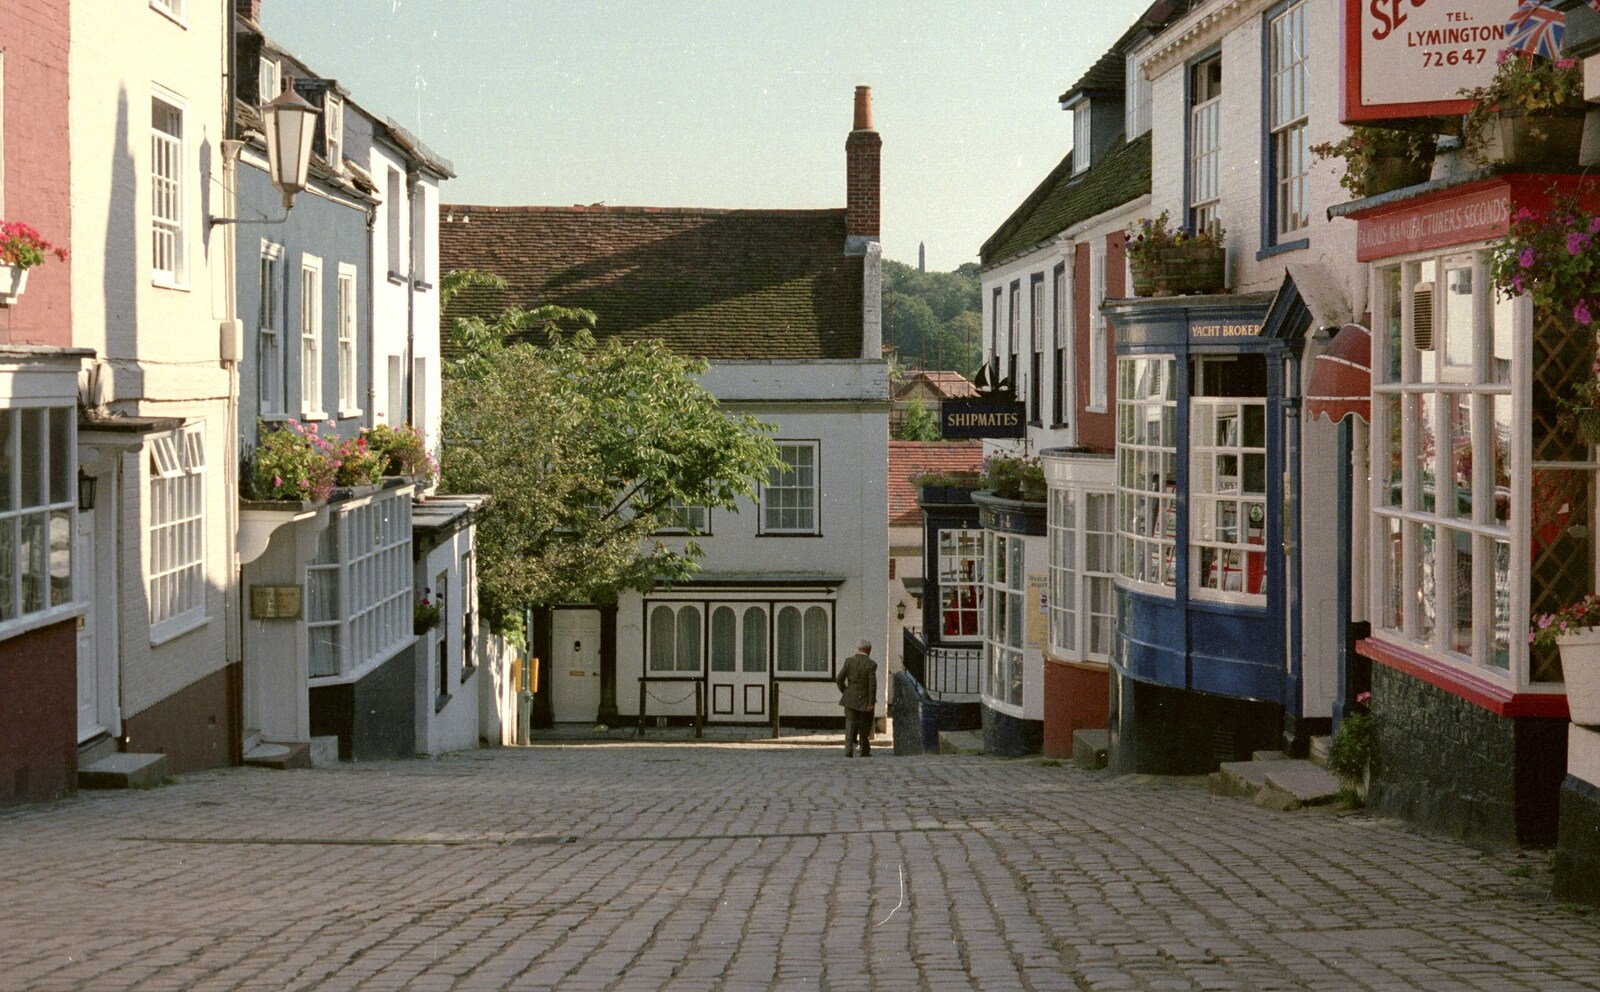 Outside the Kings Head in Lymington from A Walk in the New Forest, Hampshire - 27th July 1989